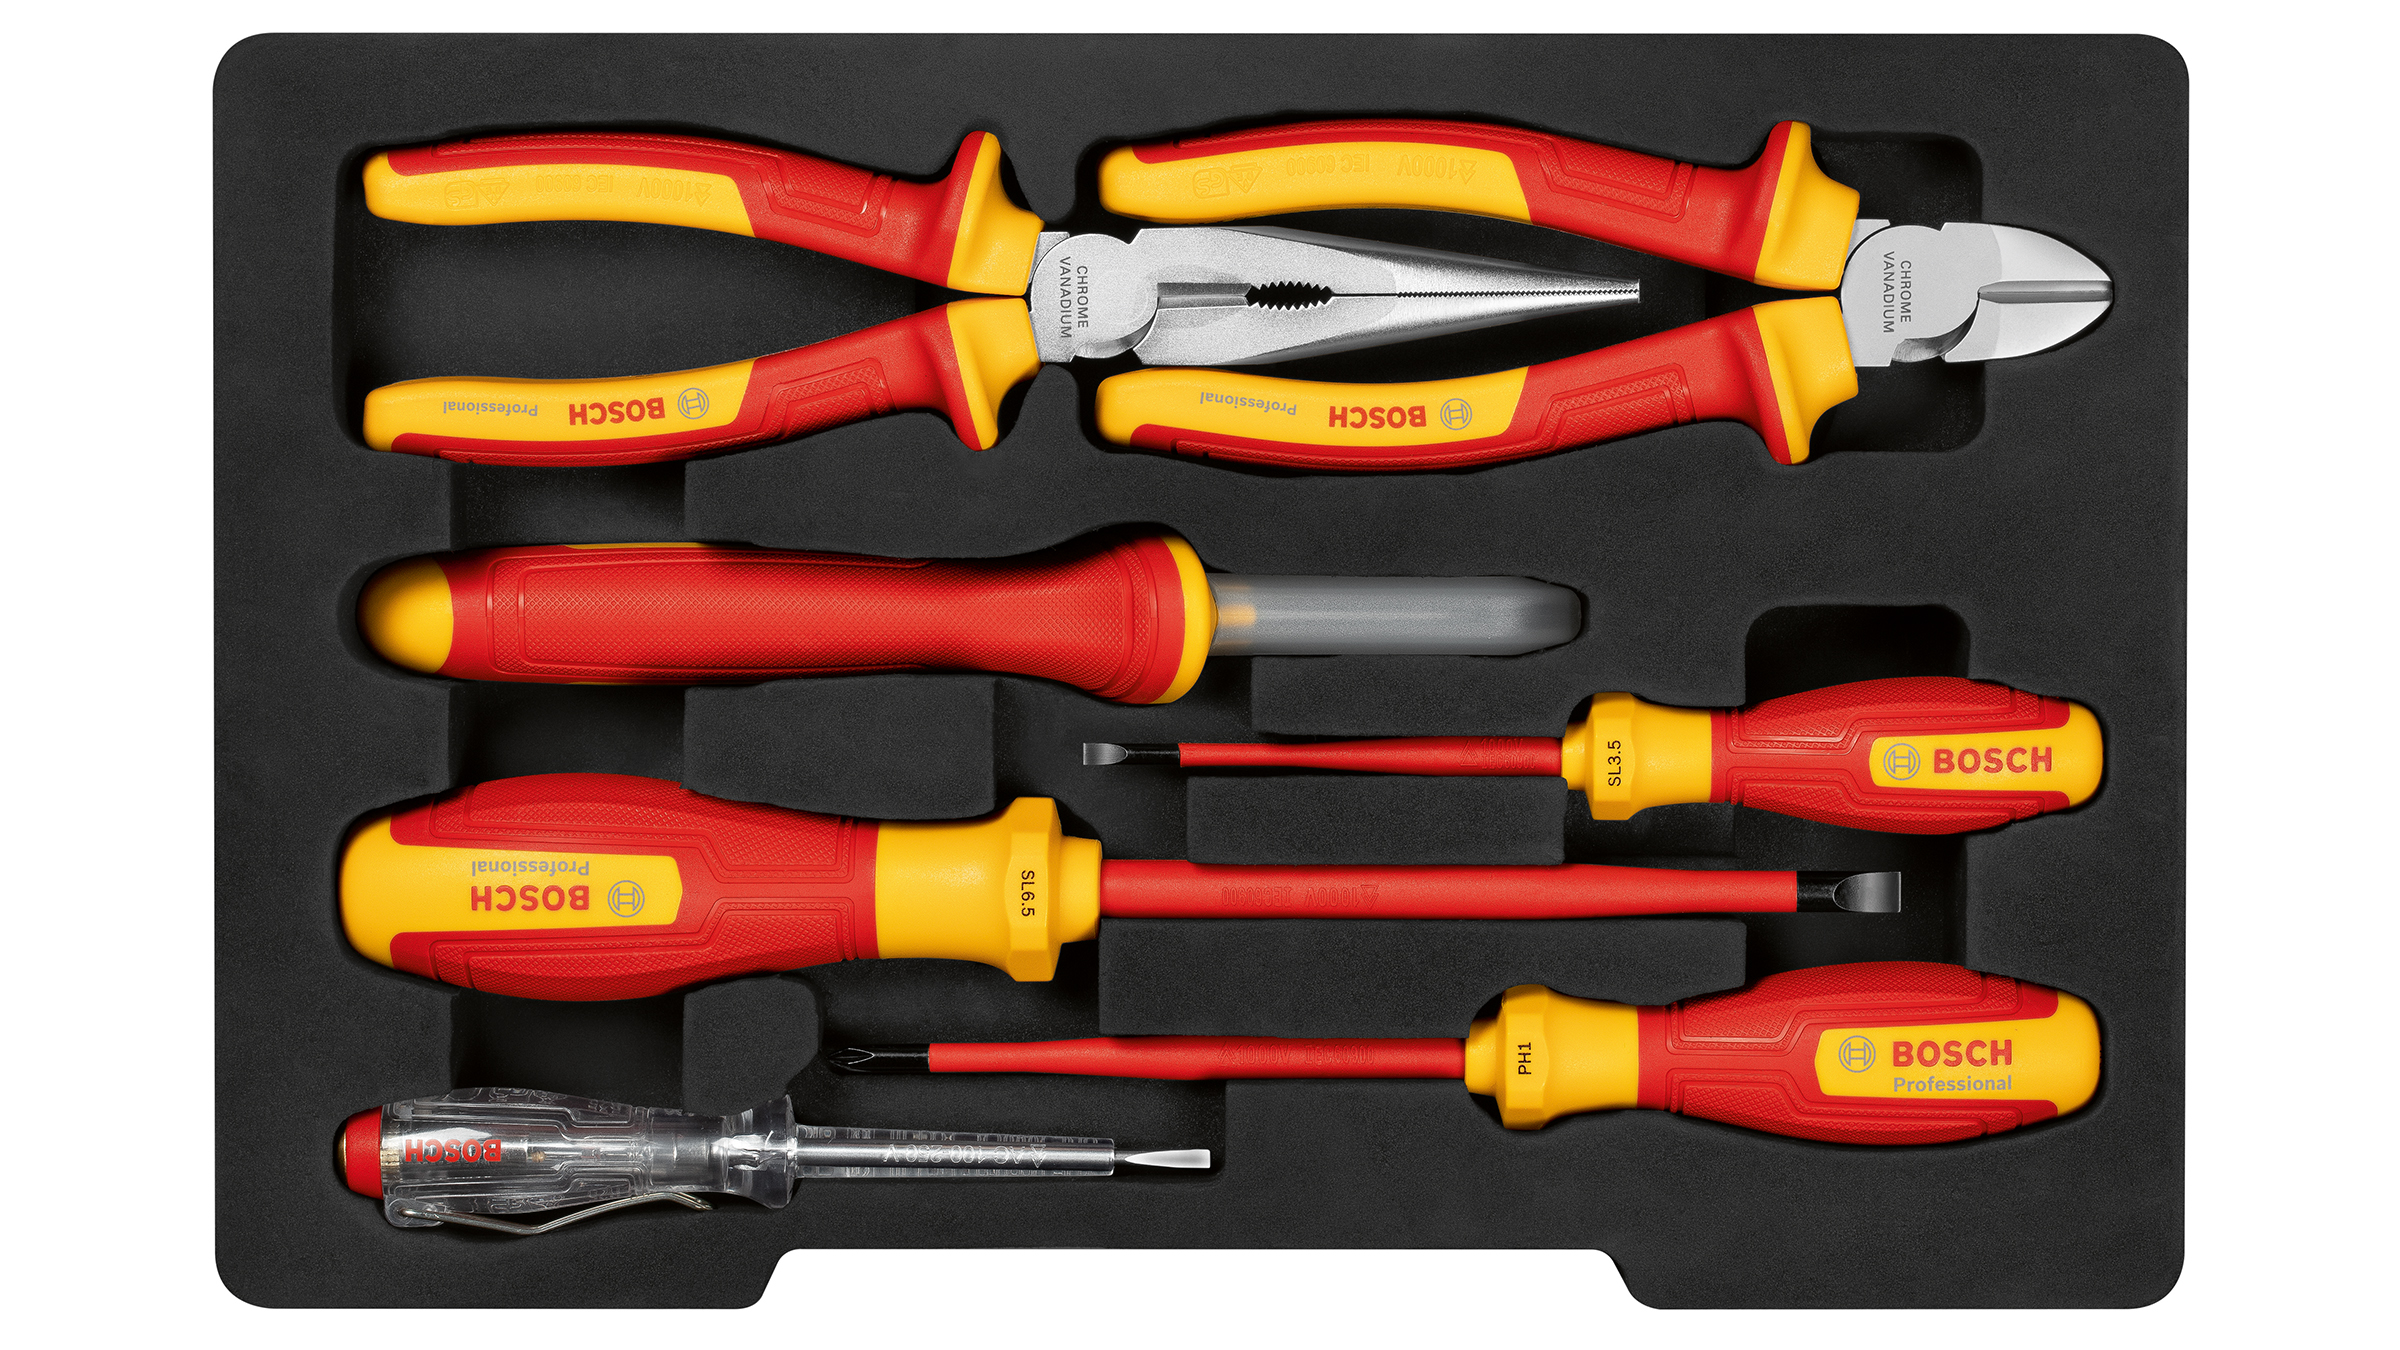 Screwdrivers, pliers, knives, and more: Bosch VDE hand tools for professionals